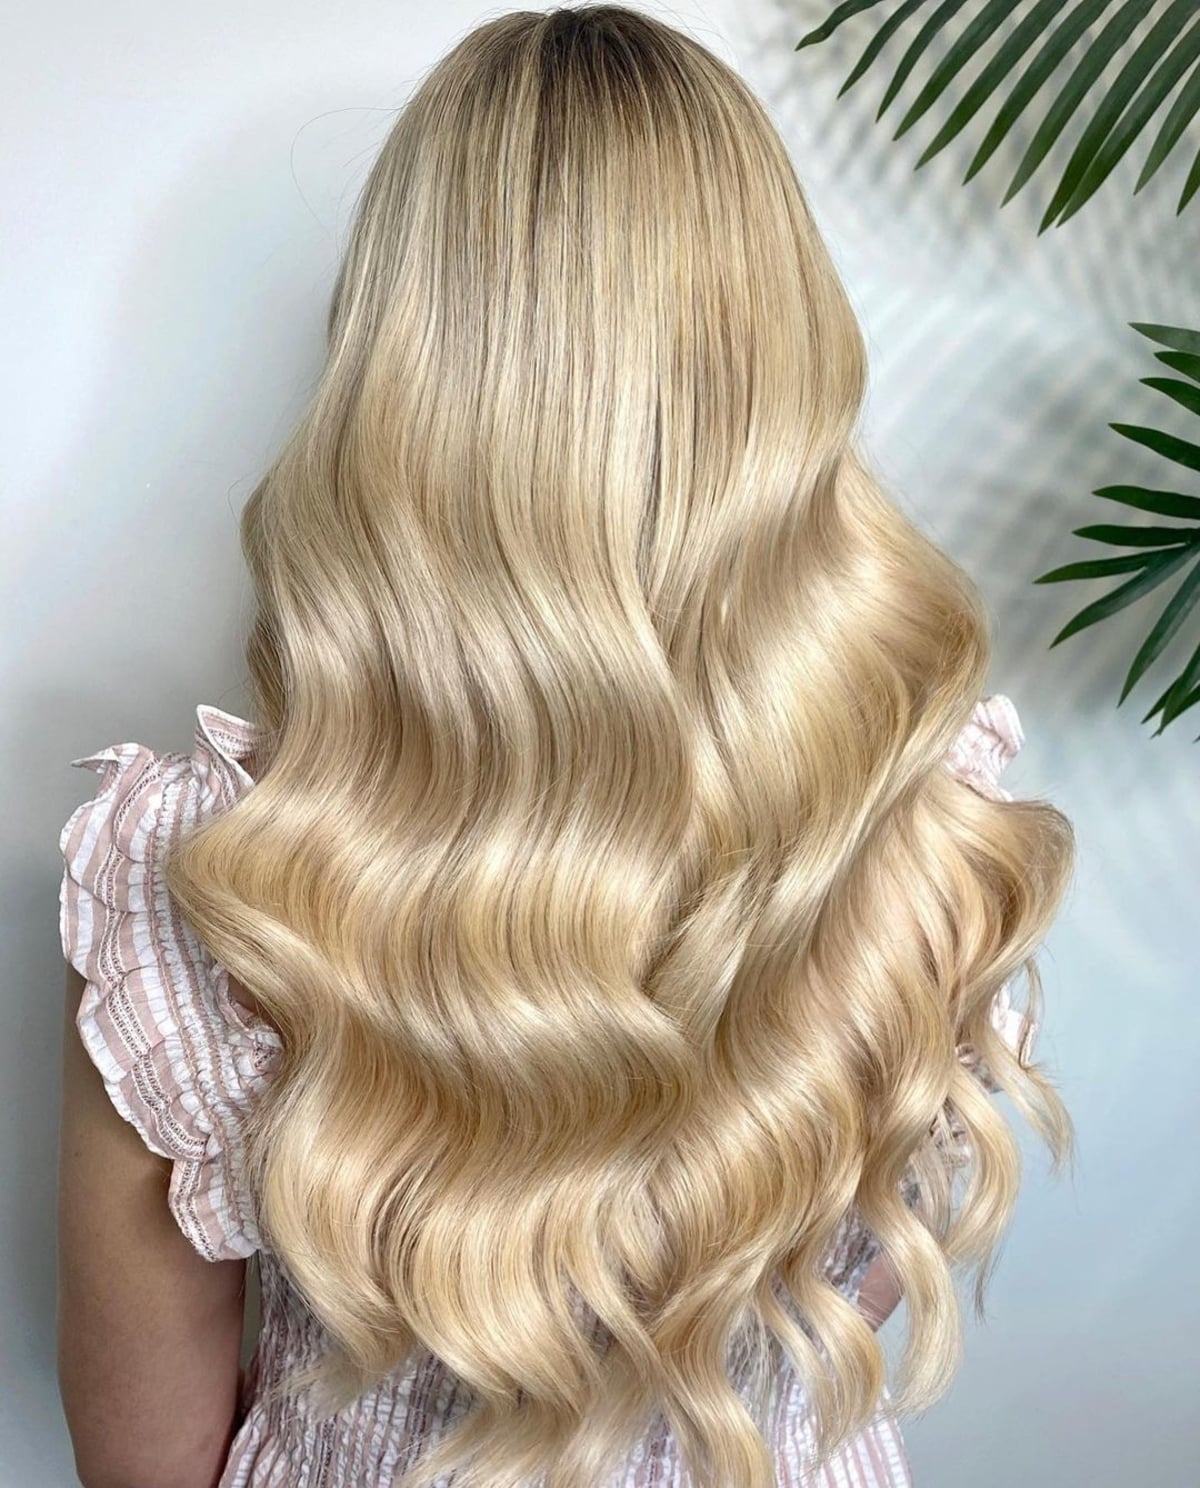 35 Gorgeous Hairstyles for Long Blonde Hair